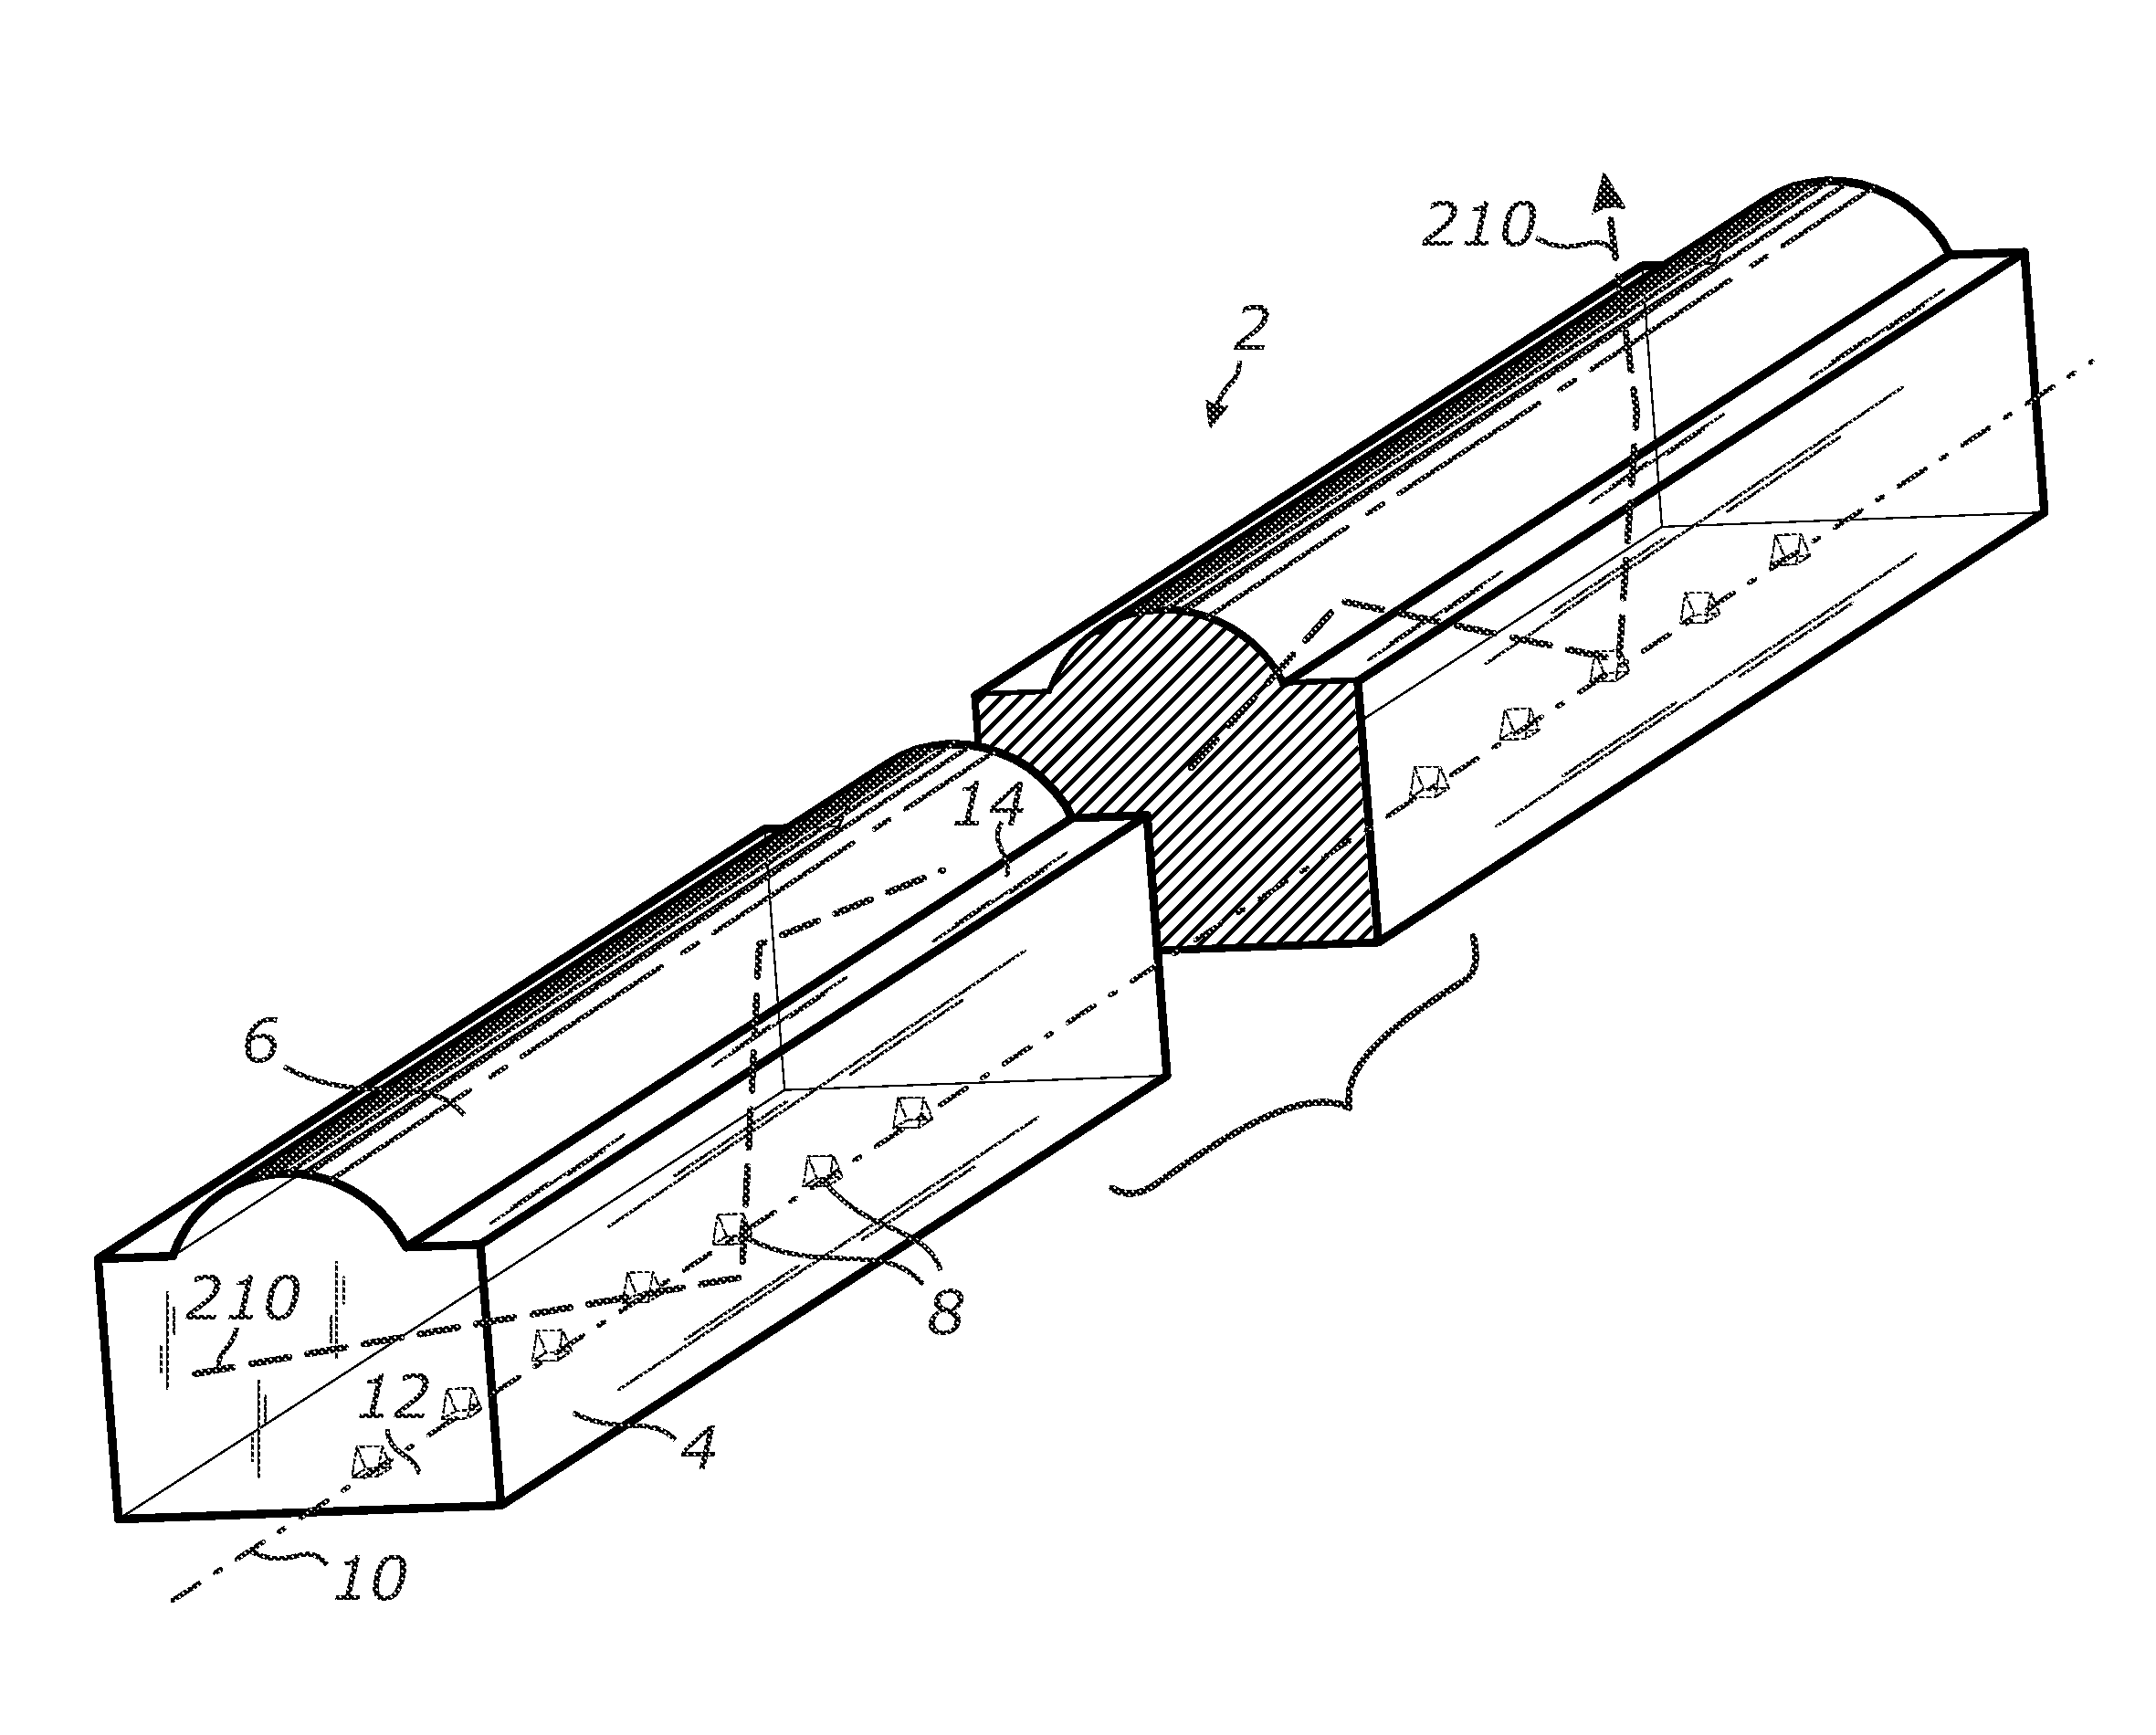 Collimating illumination systems employing a waveguide